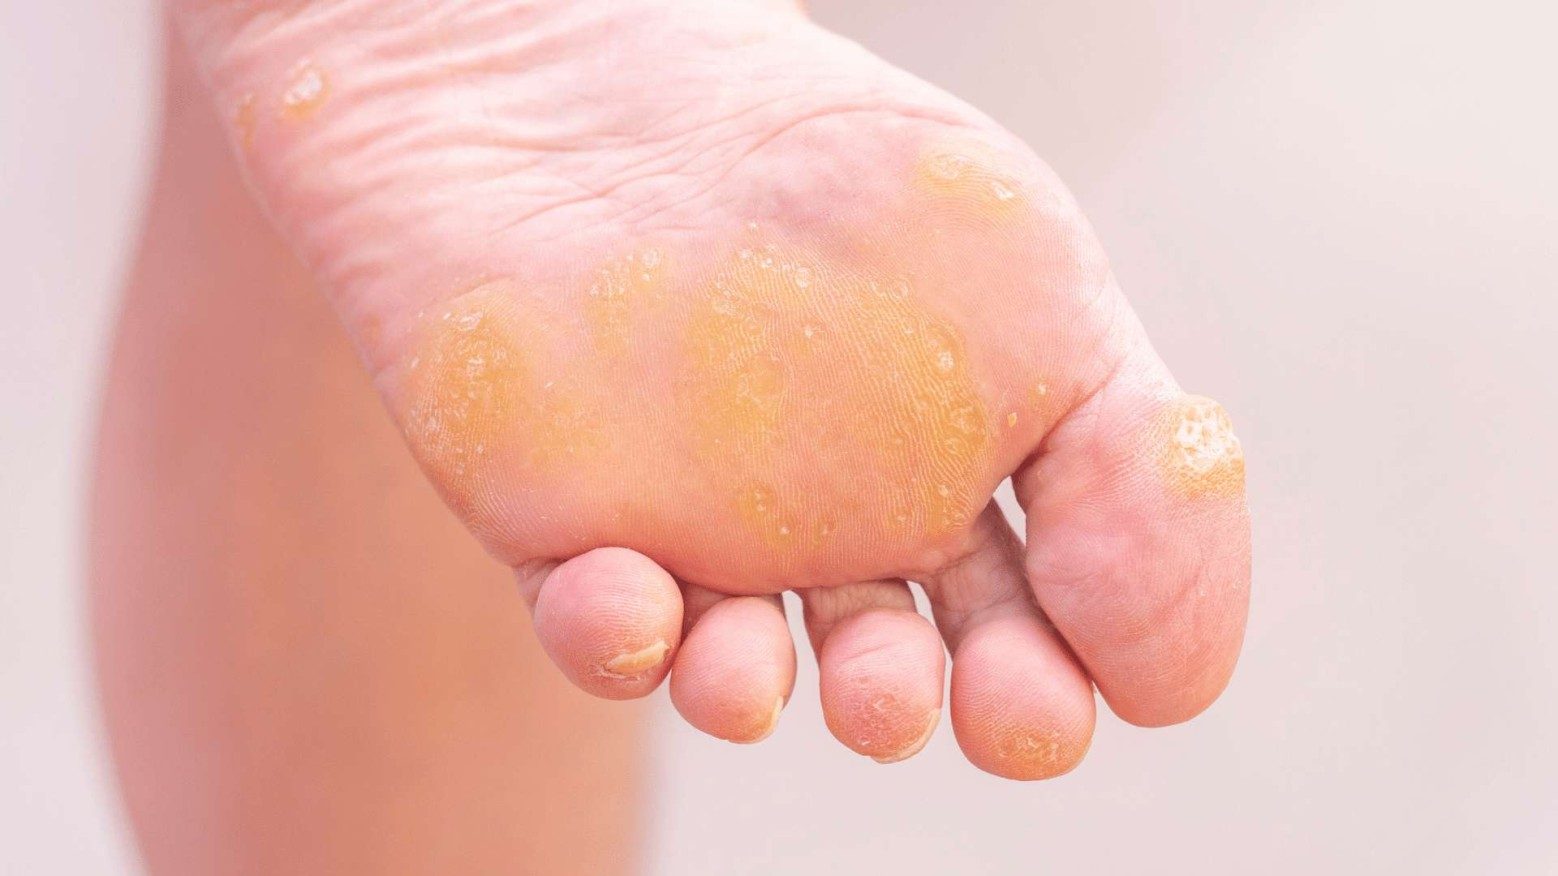 https://www.thefeetpeople.com.au/media/website_pages/symptoms-we-treat/corns-calluses/Corns-and-Calluses_1558x876a.jpg